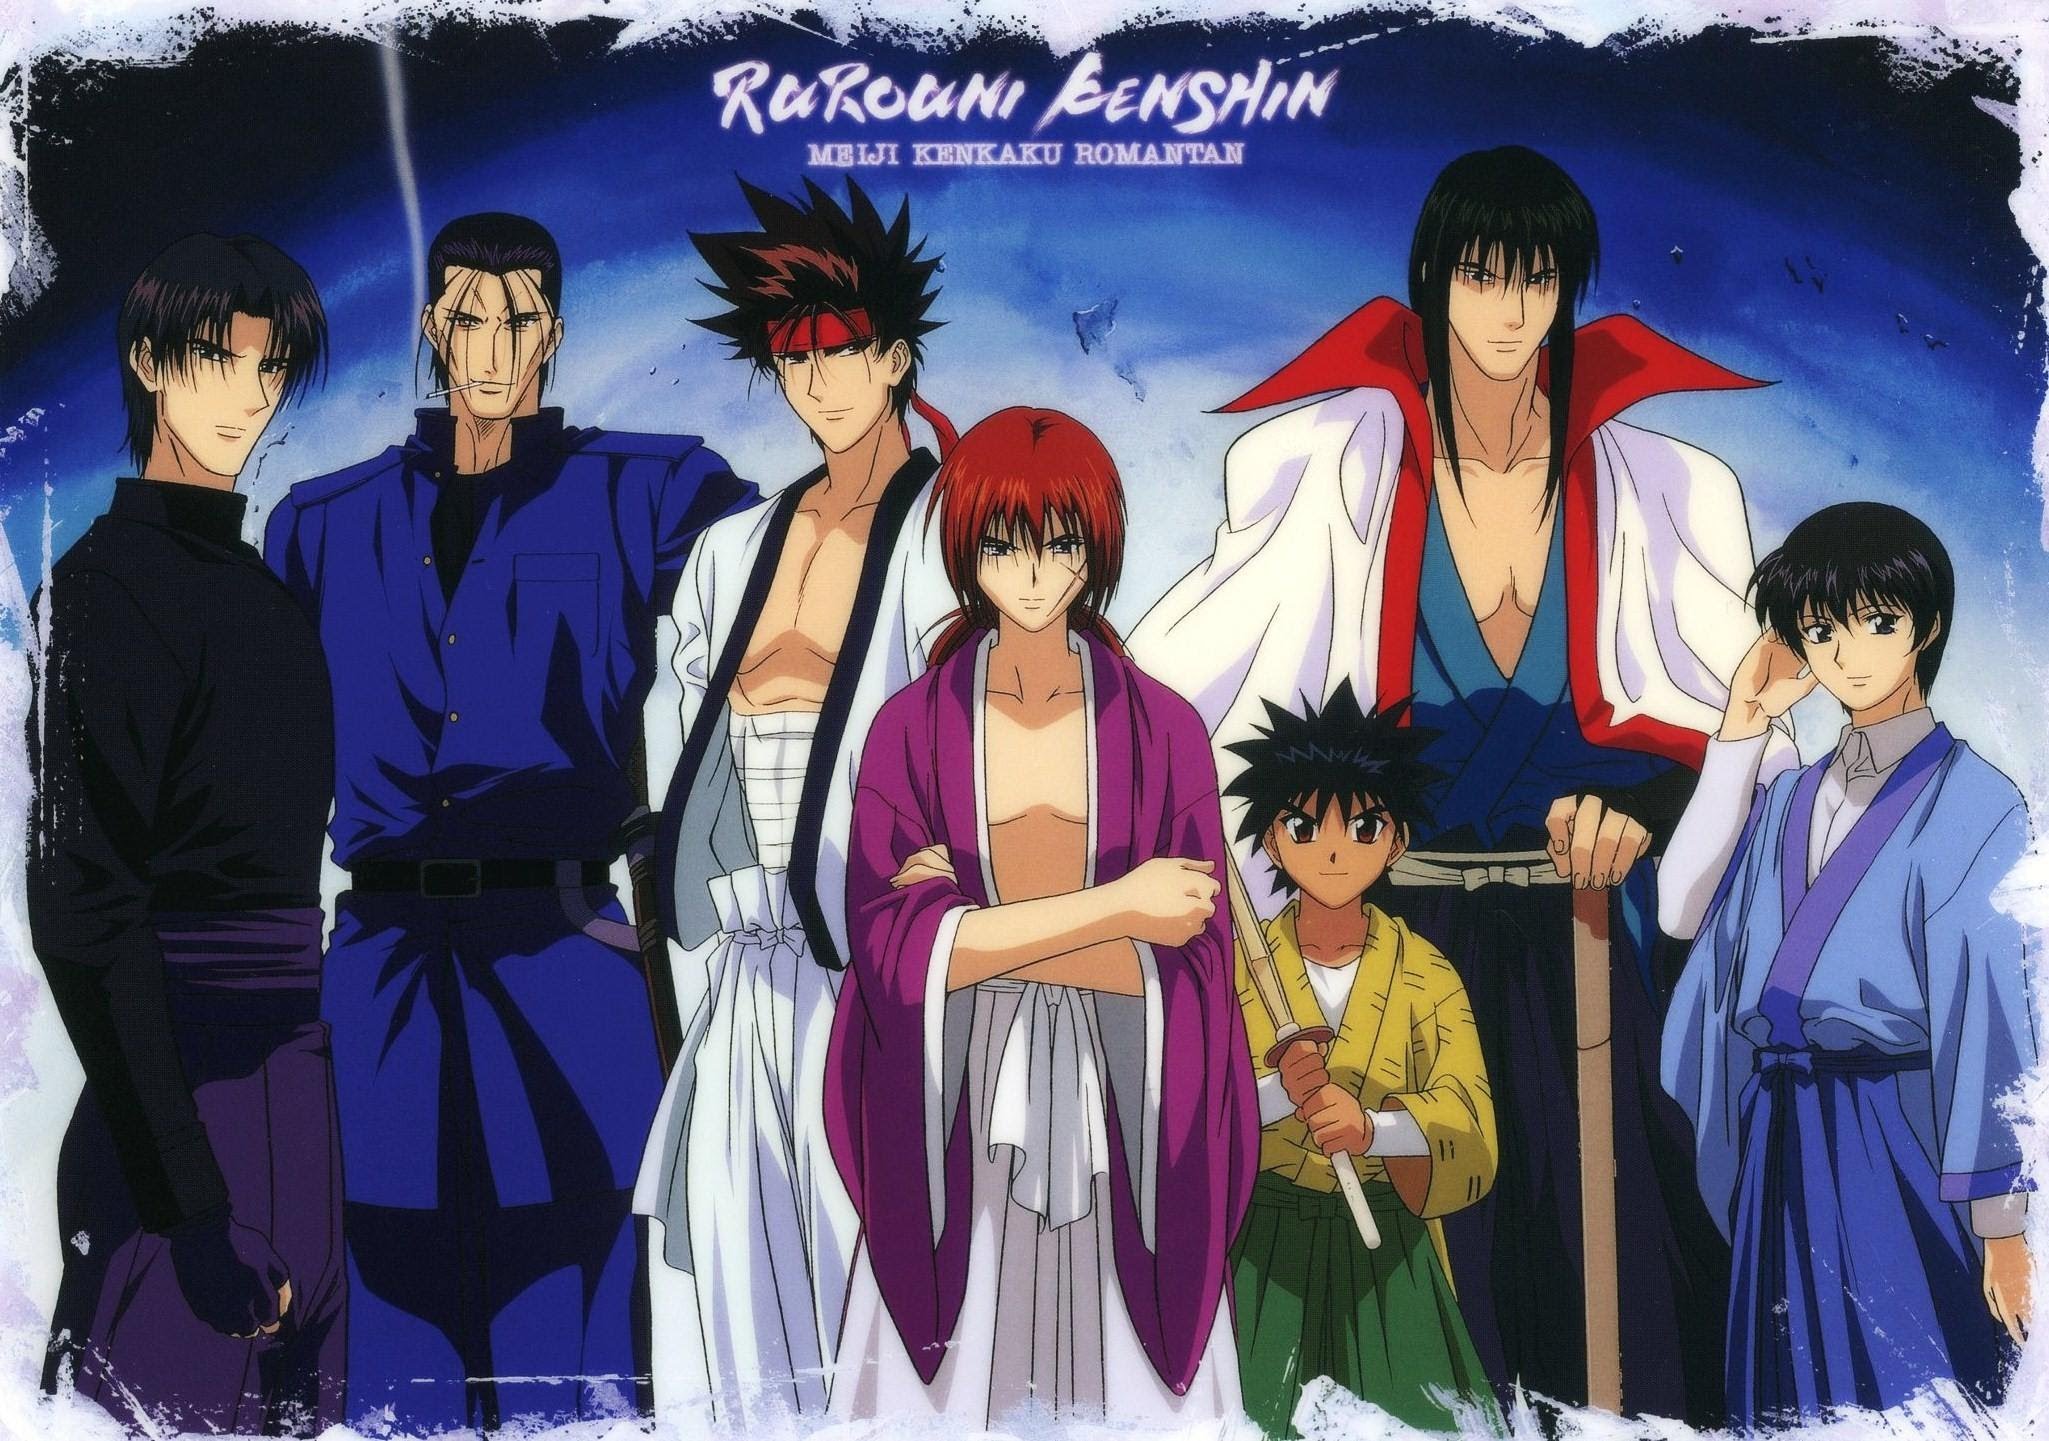 Will the Rurouni Kenshin Anime be any better than the films?